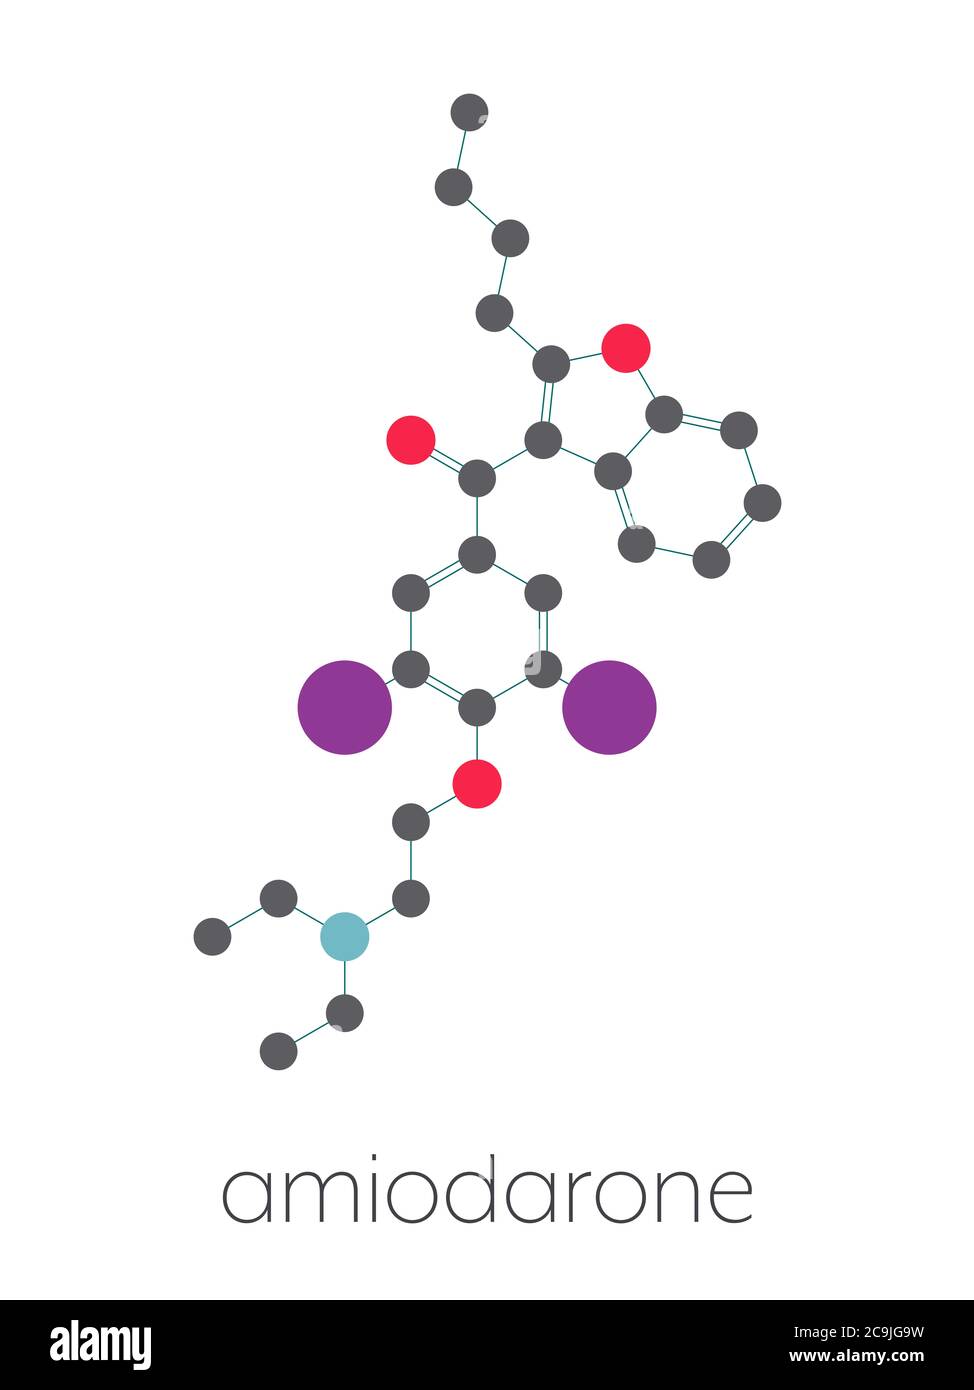 Amiodarone antiarrhythmic drug molecule. Stylized skeletal formula (chemical structure). Atoms are shown as color-coded circles connected by thin bond Stock Photo